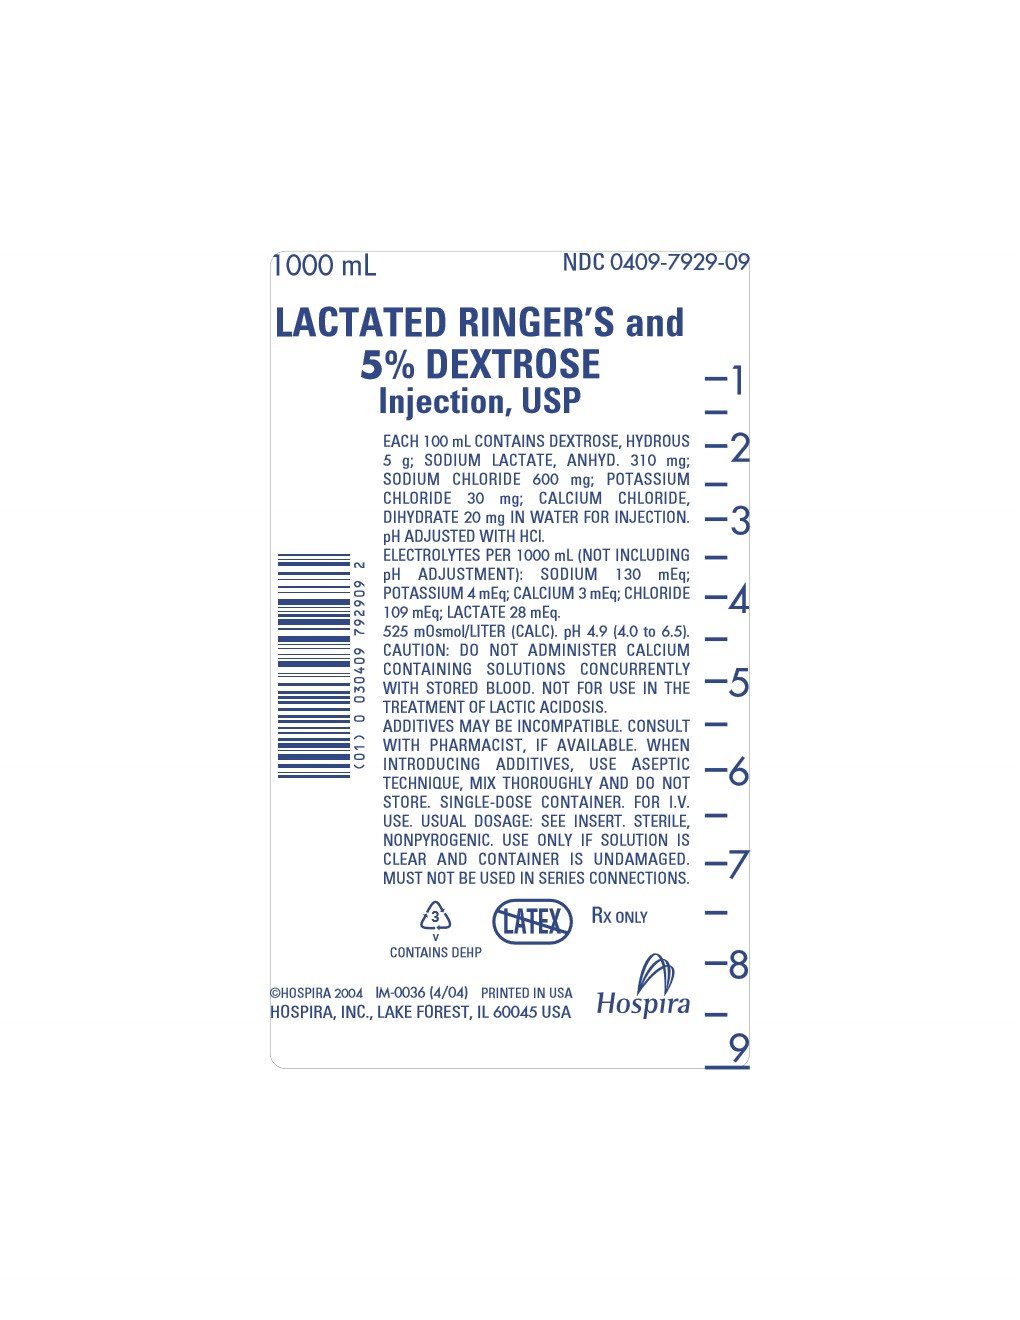 RINGERS AND DEXTROSE LABEL